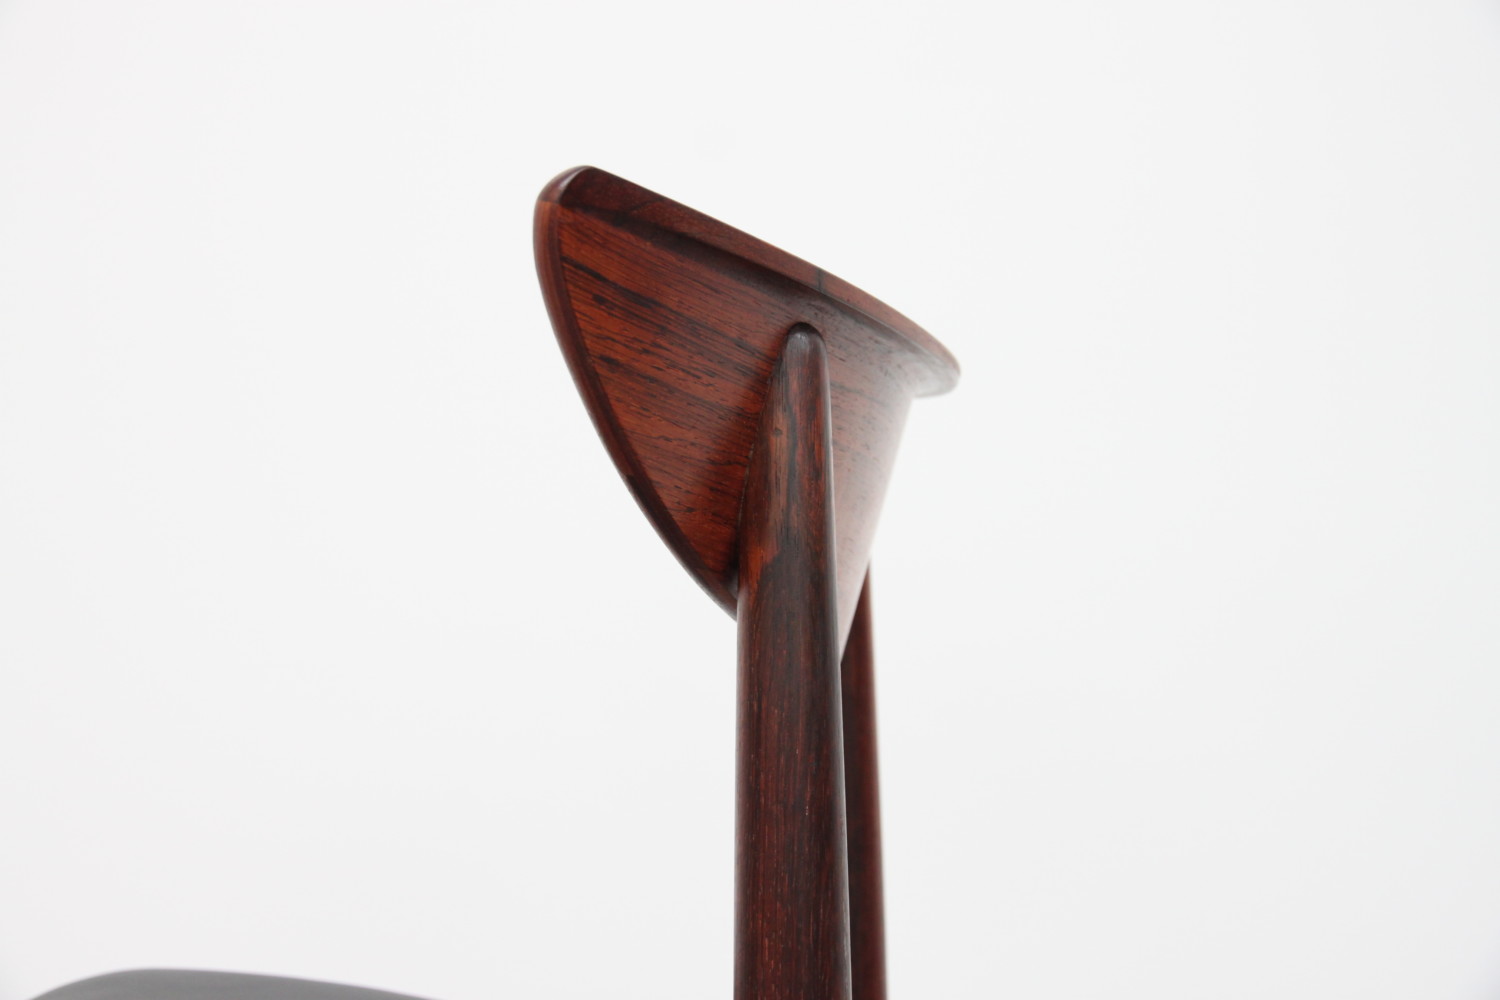 Dining chairs by Harry Ostergaard